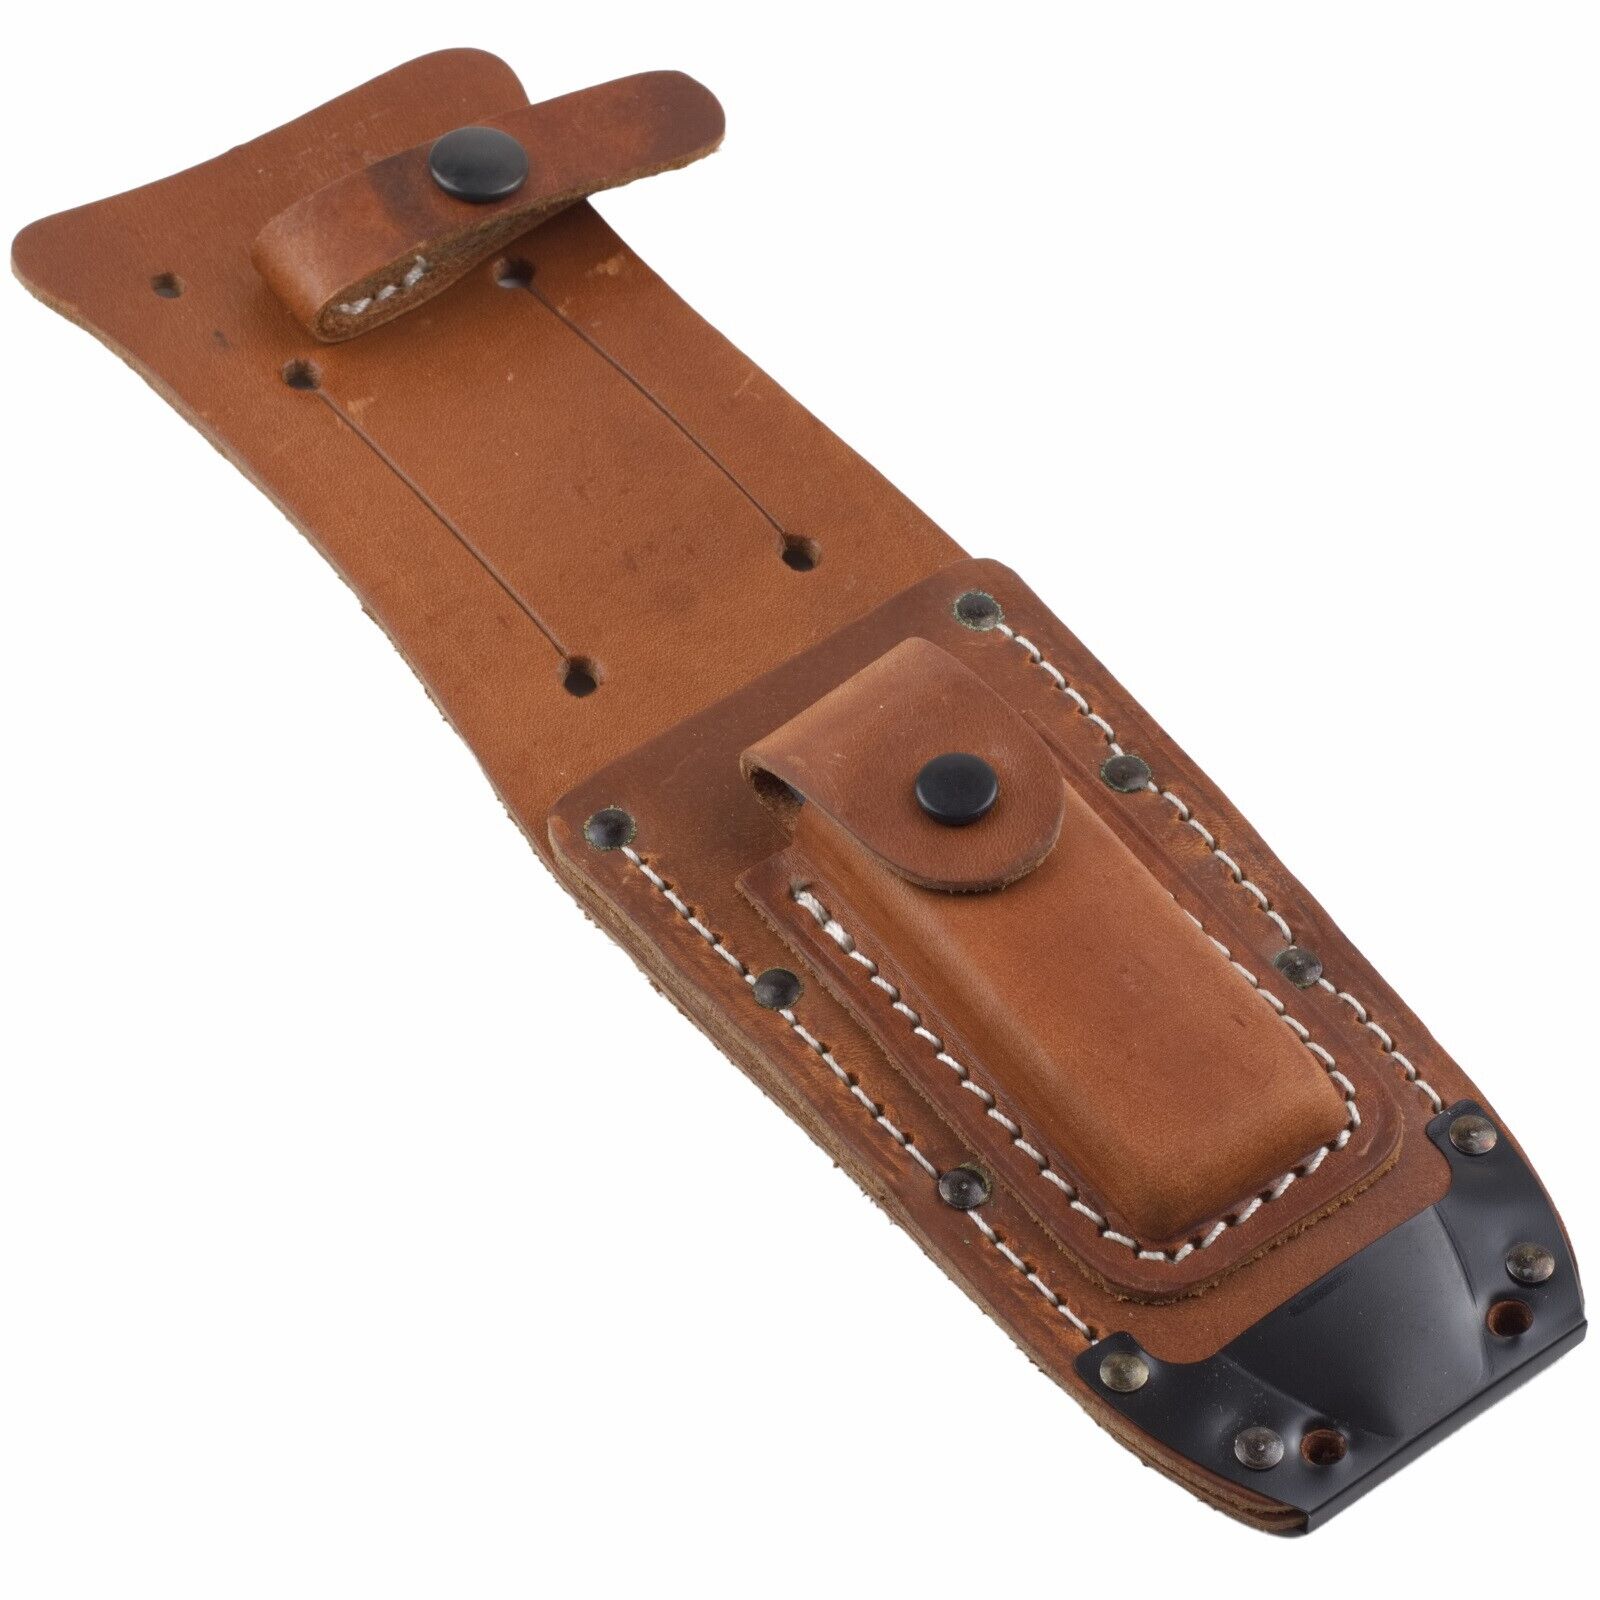 Ontario Leather Sheath Fits 499 Air Force Survival Knife with Sharpening Stone